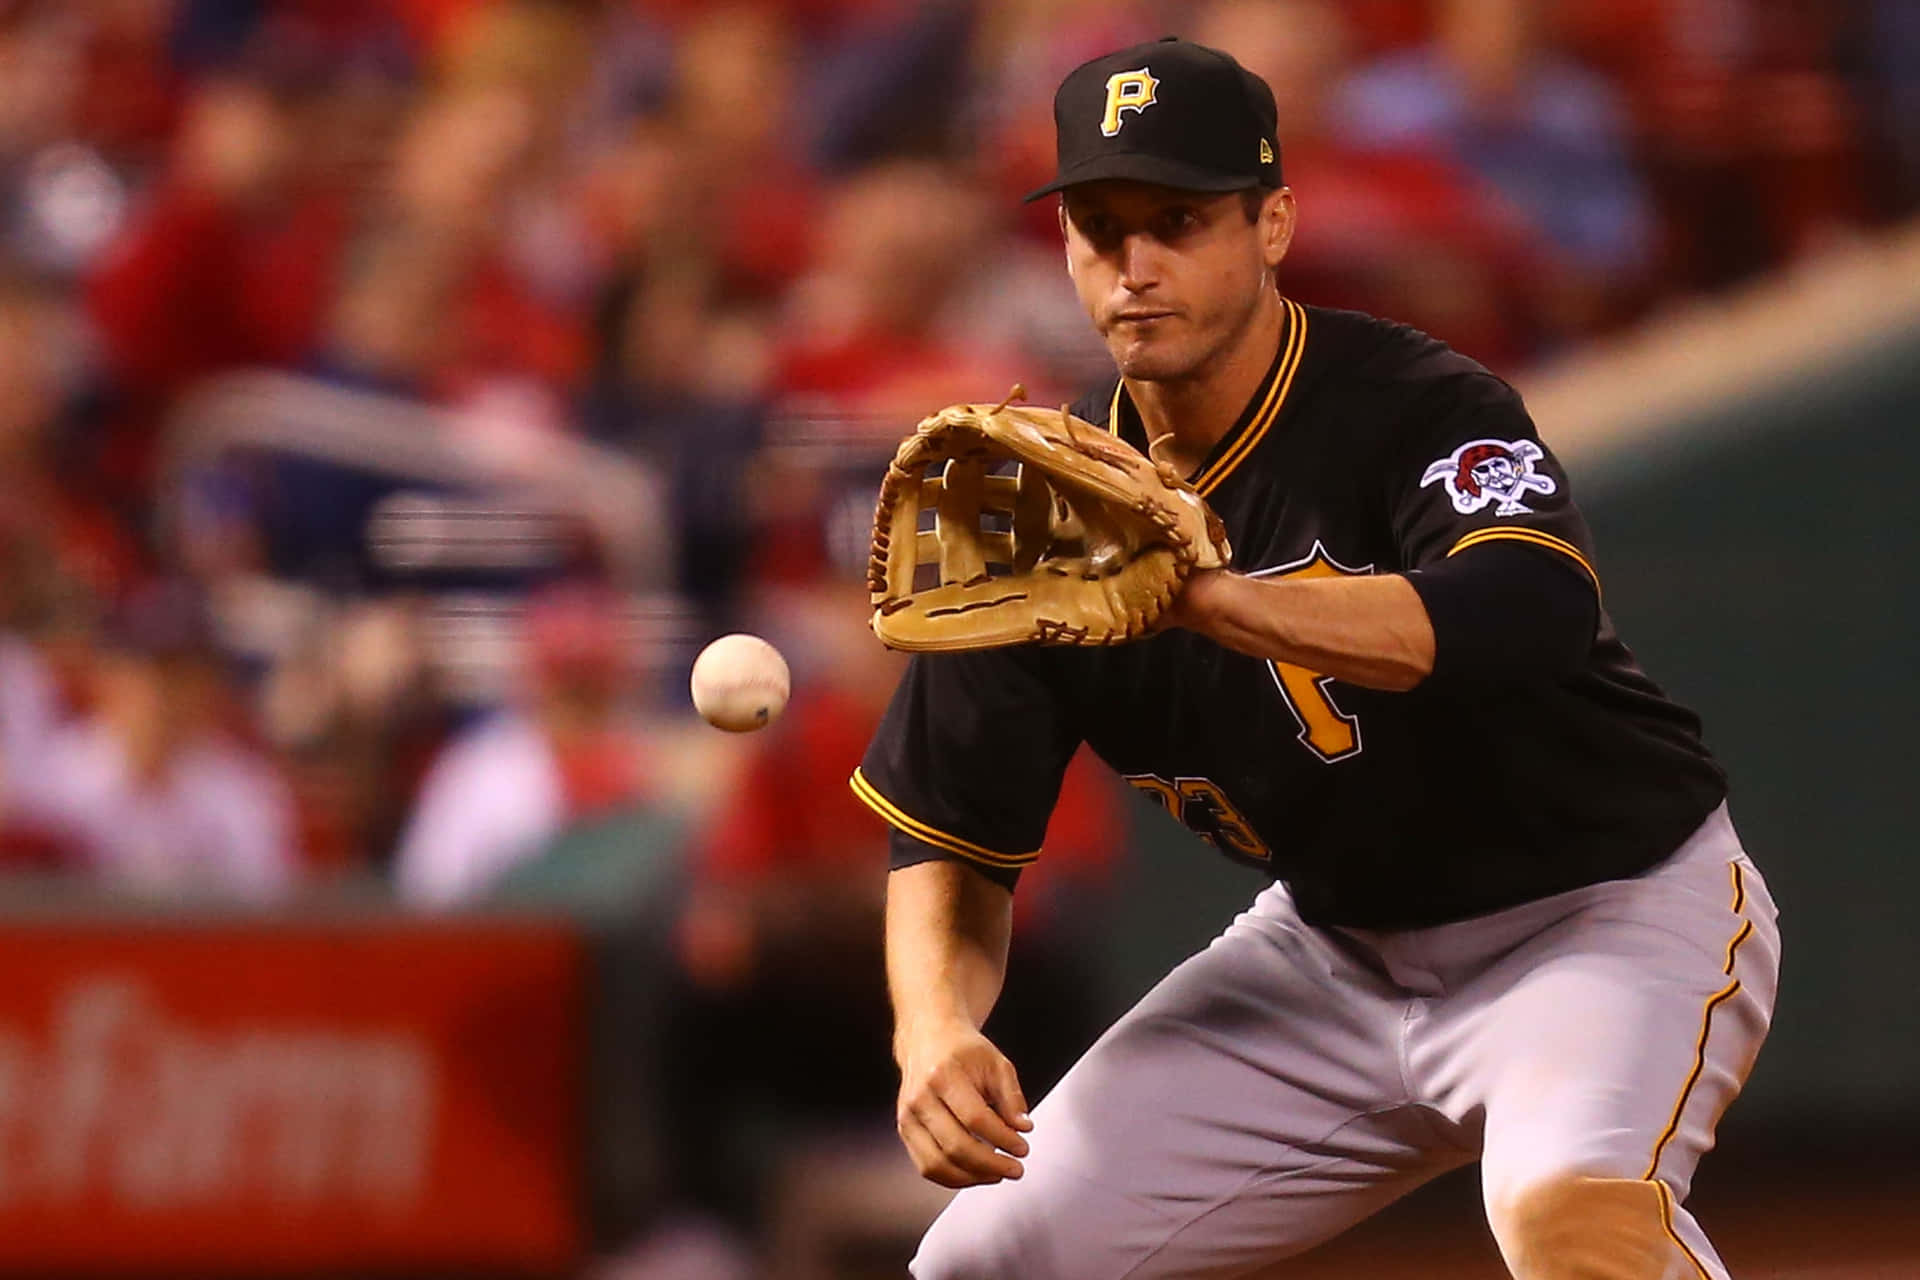 David Freese In Action During A Game Wallpaper